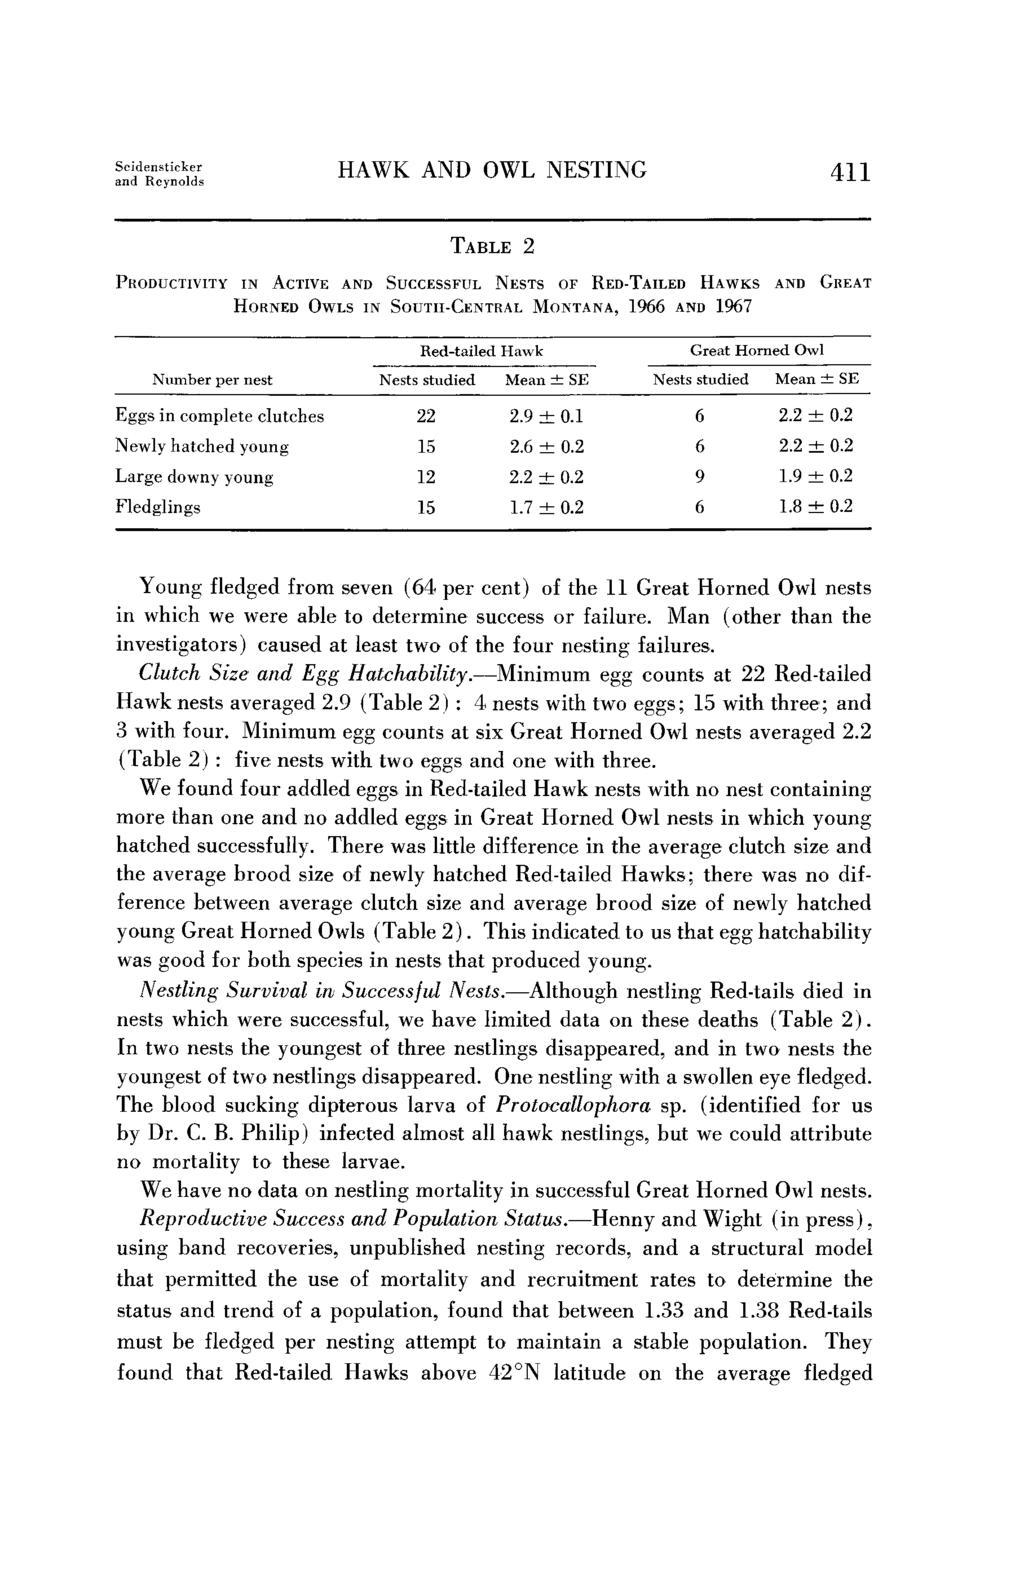 Scidmsticker and Reynolds HAWK AND OWL NESTING 411 TABLE 2 PRODUCTIVITY IN ACTIVE AND SUCCESSFUL NESTS OF RED-TAILED HAWKS AND GREAT HORNED OWLS IN SOUTII-CENTRAL MONTANA, 1966 AND 1%7 Number per